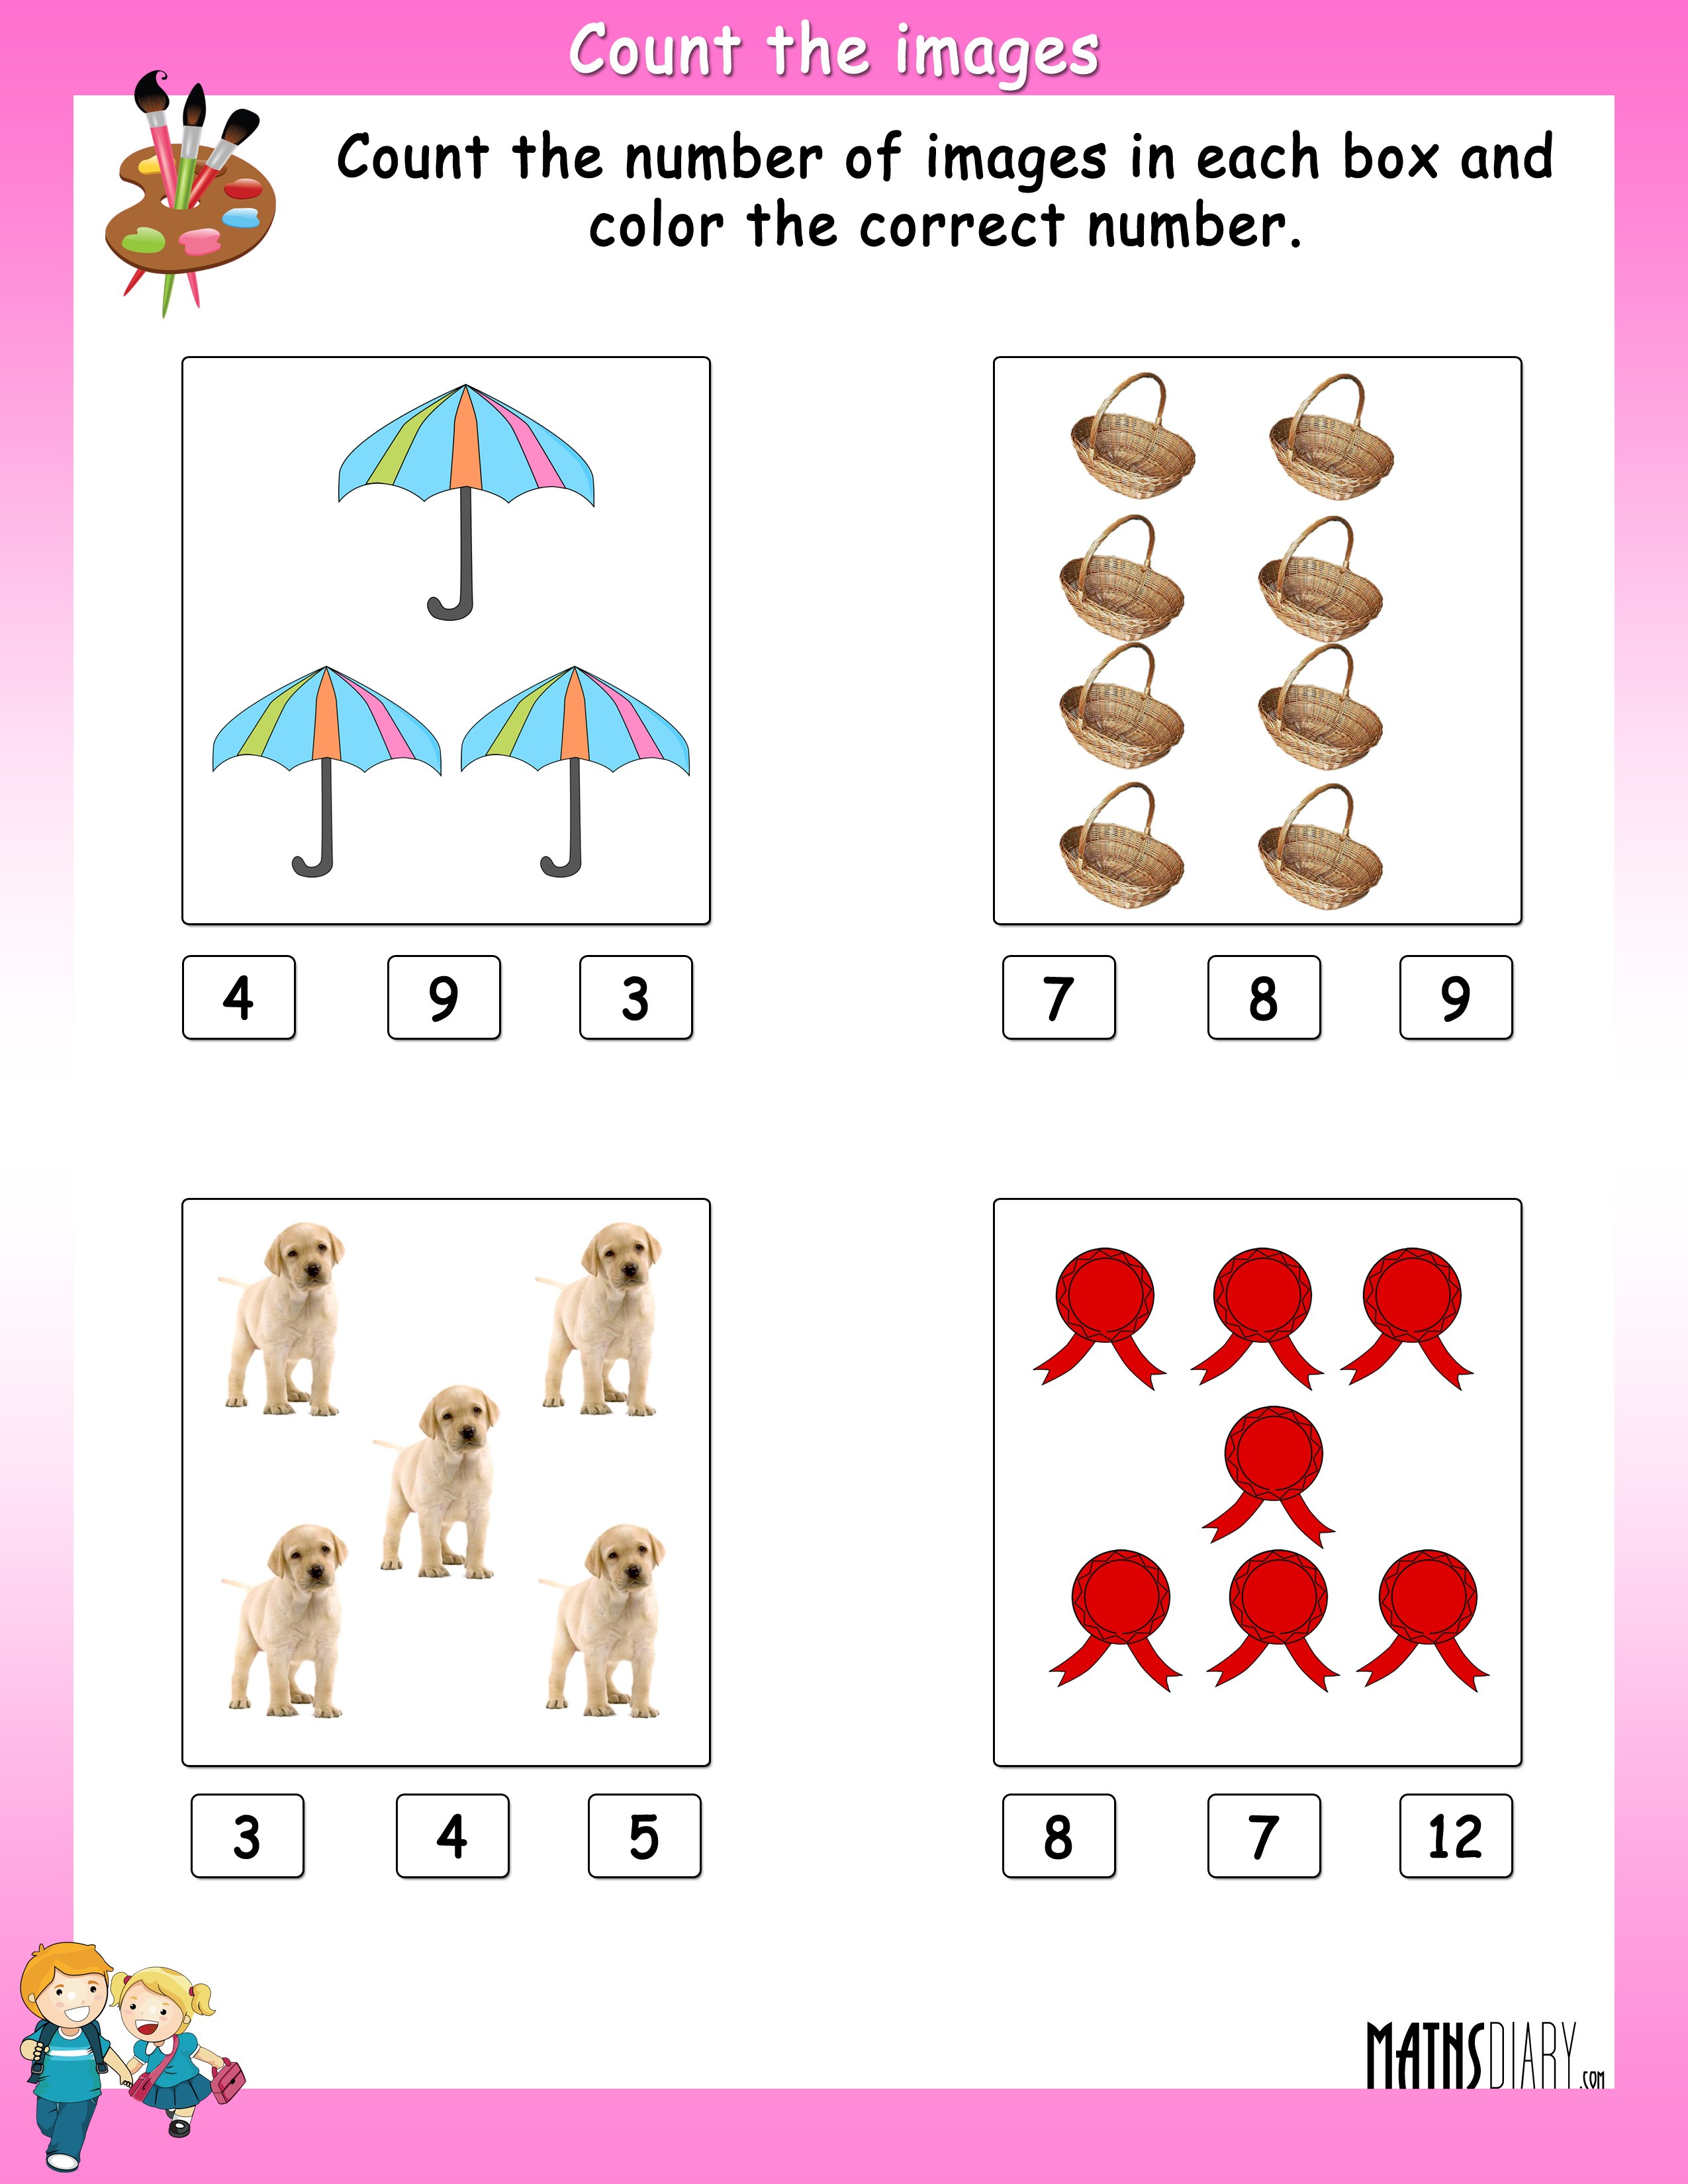 Counting Worksheet For Class 1 And Ukg Math Elearnbuzz Counting 